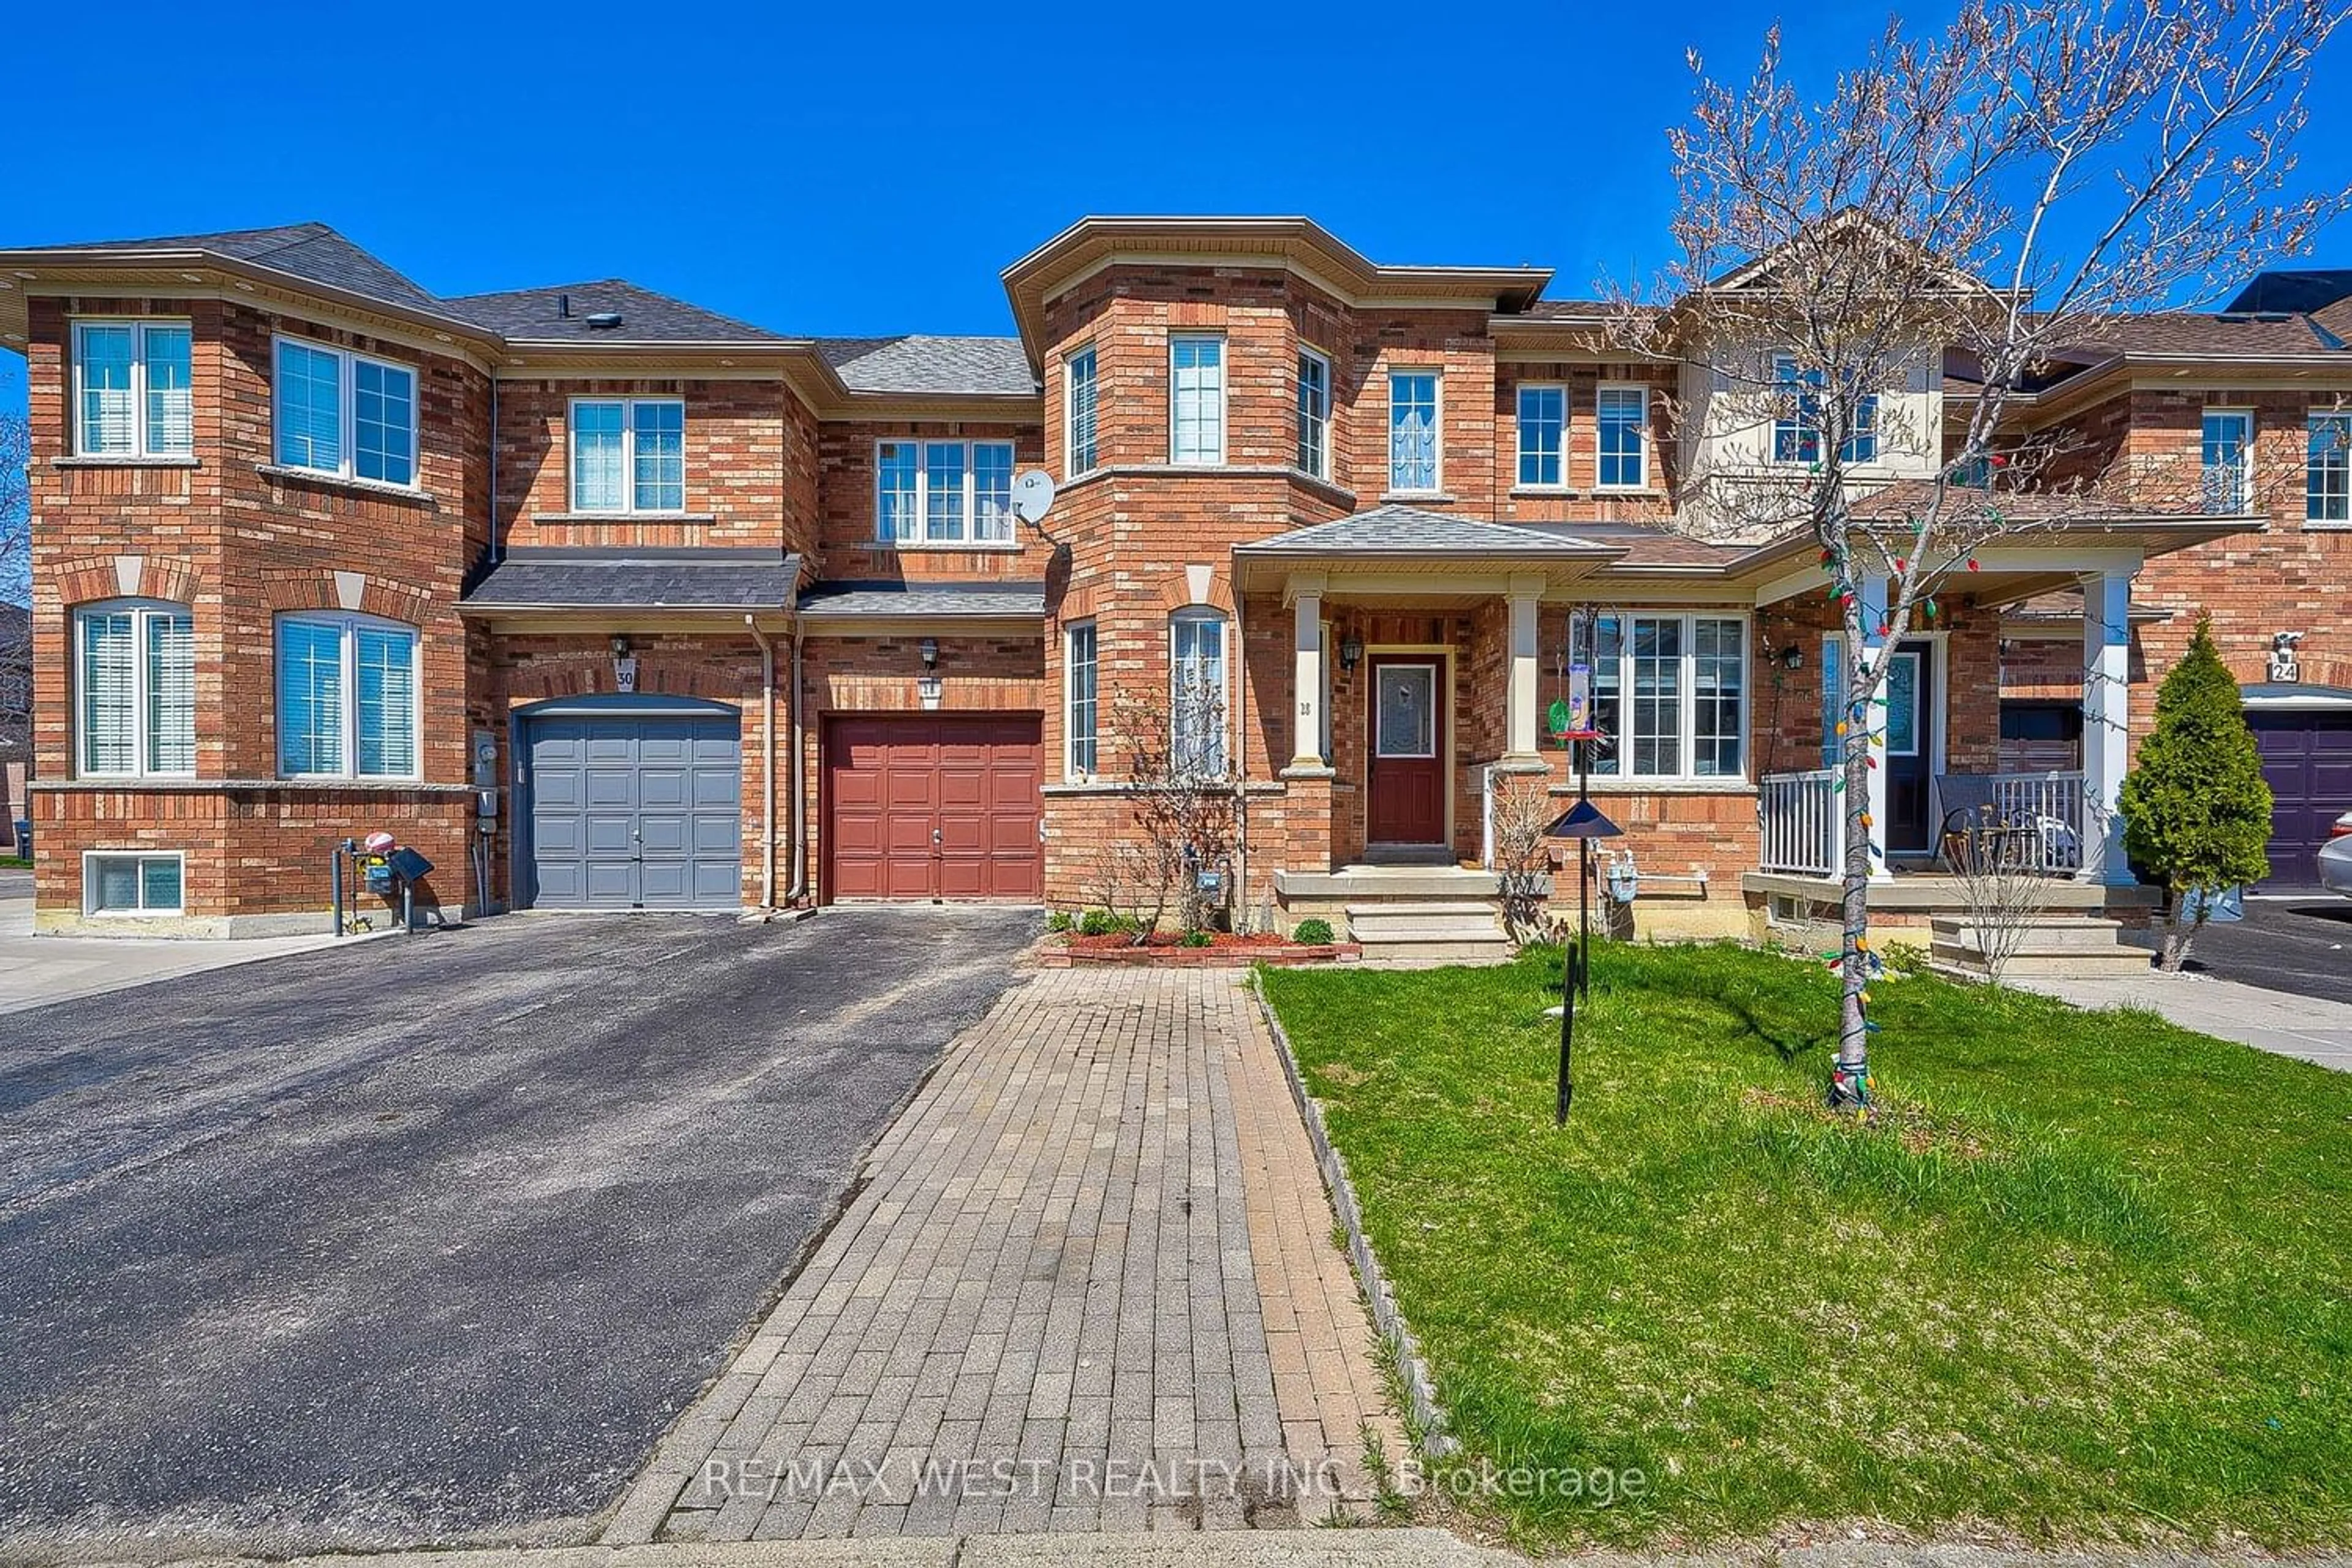 Home with brick exterior material for 28 Pompano Pl, Brampton Ontario L6P 1N5